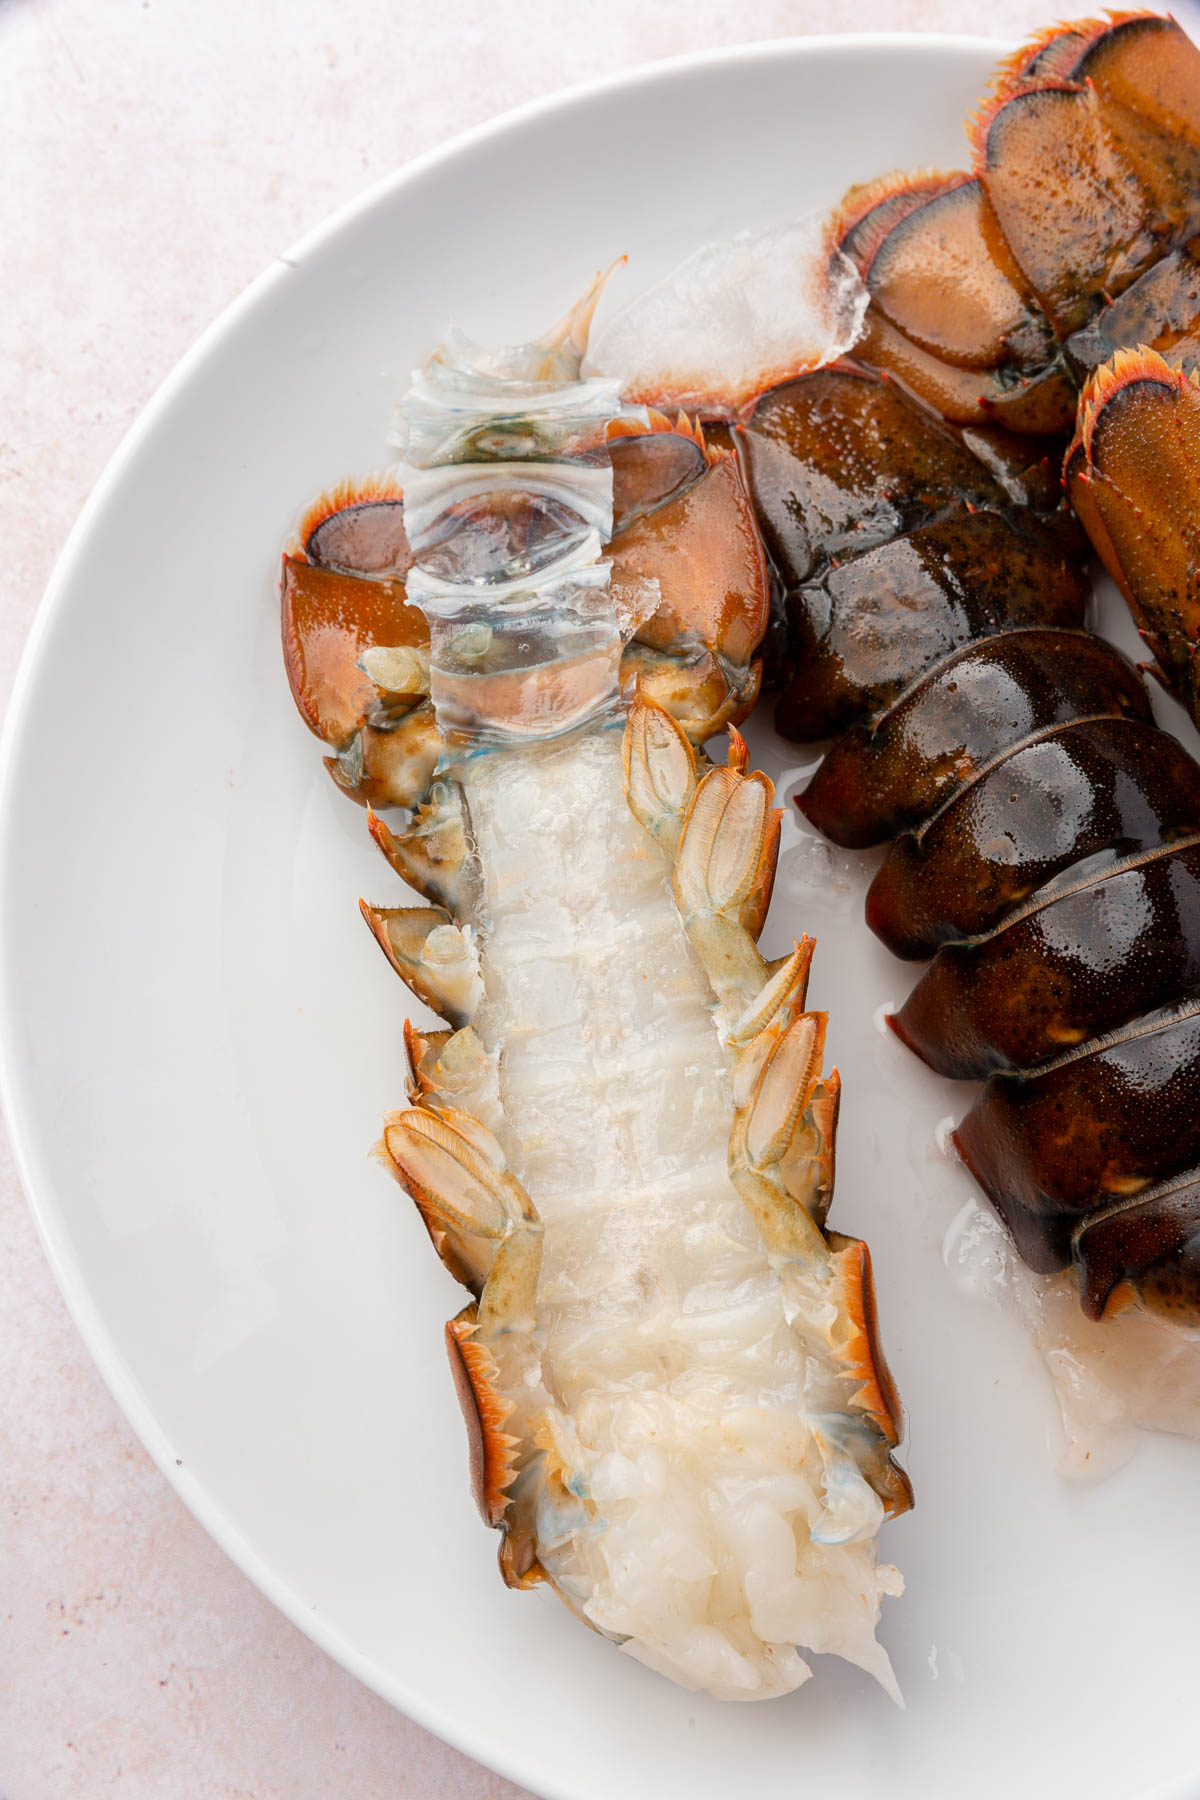 The undersize of the lobster shell is pulled back toward the tail to show the process of removing lobster meat from the shell before cooking.